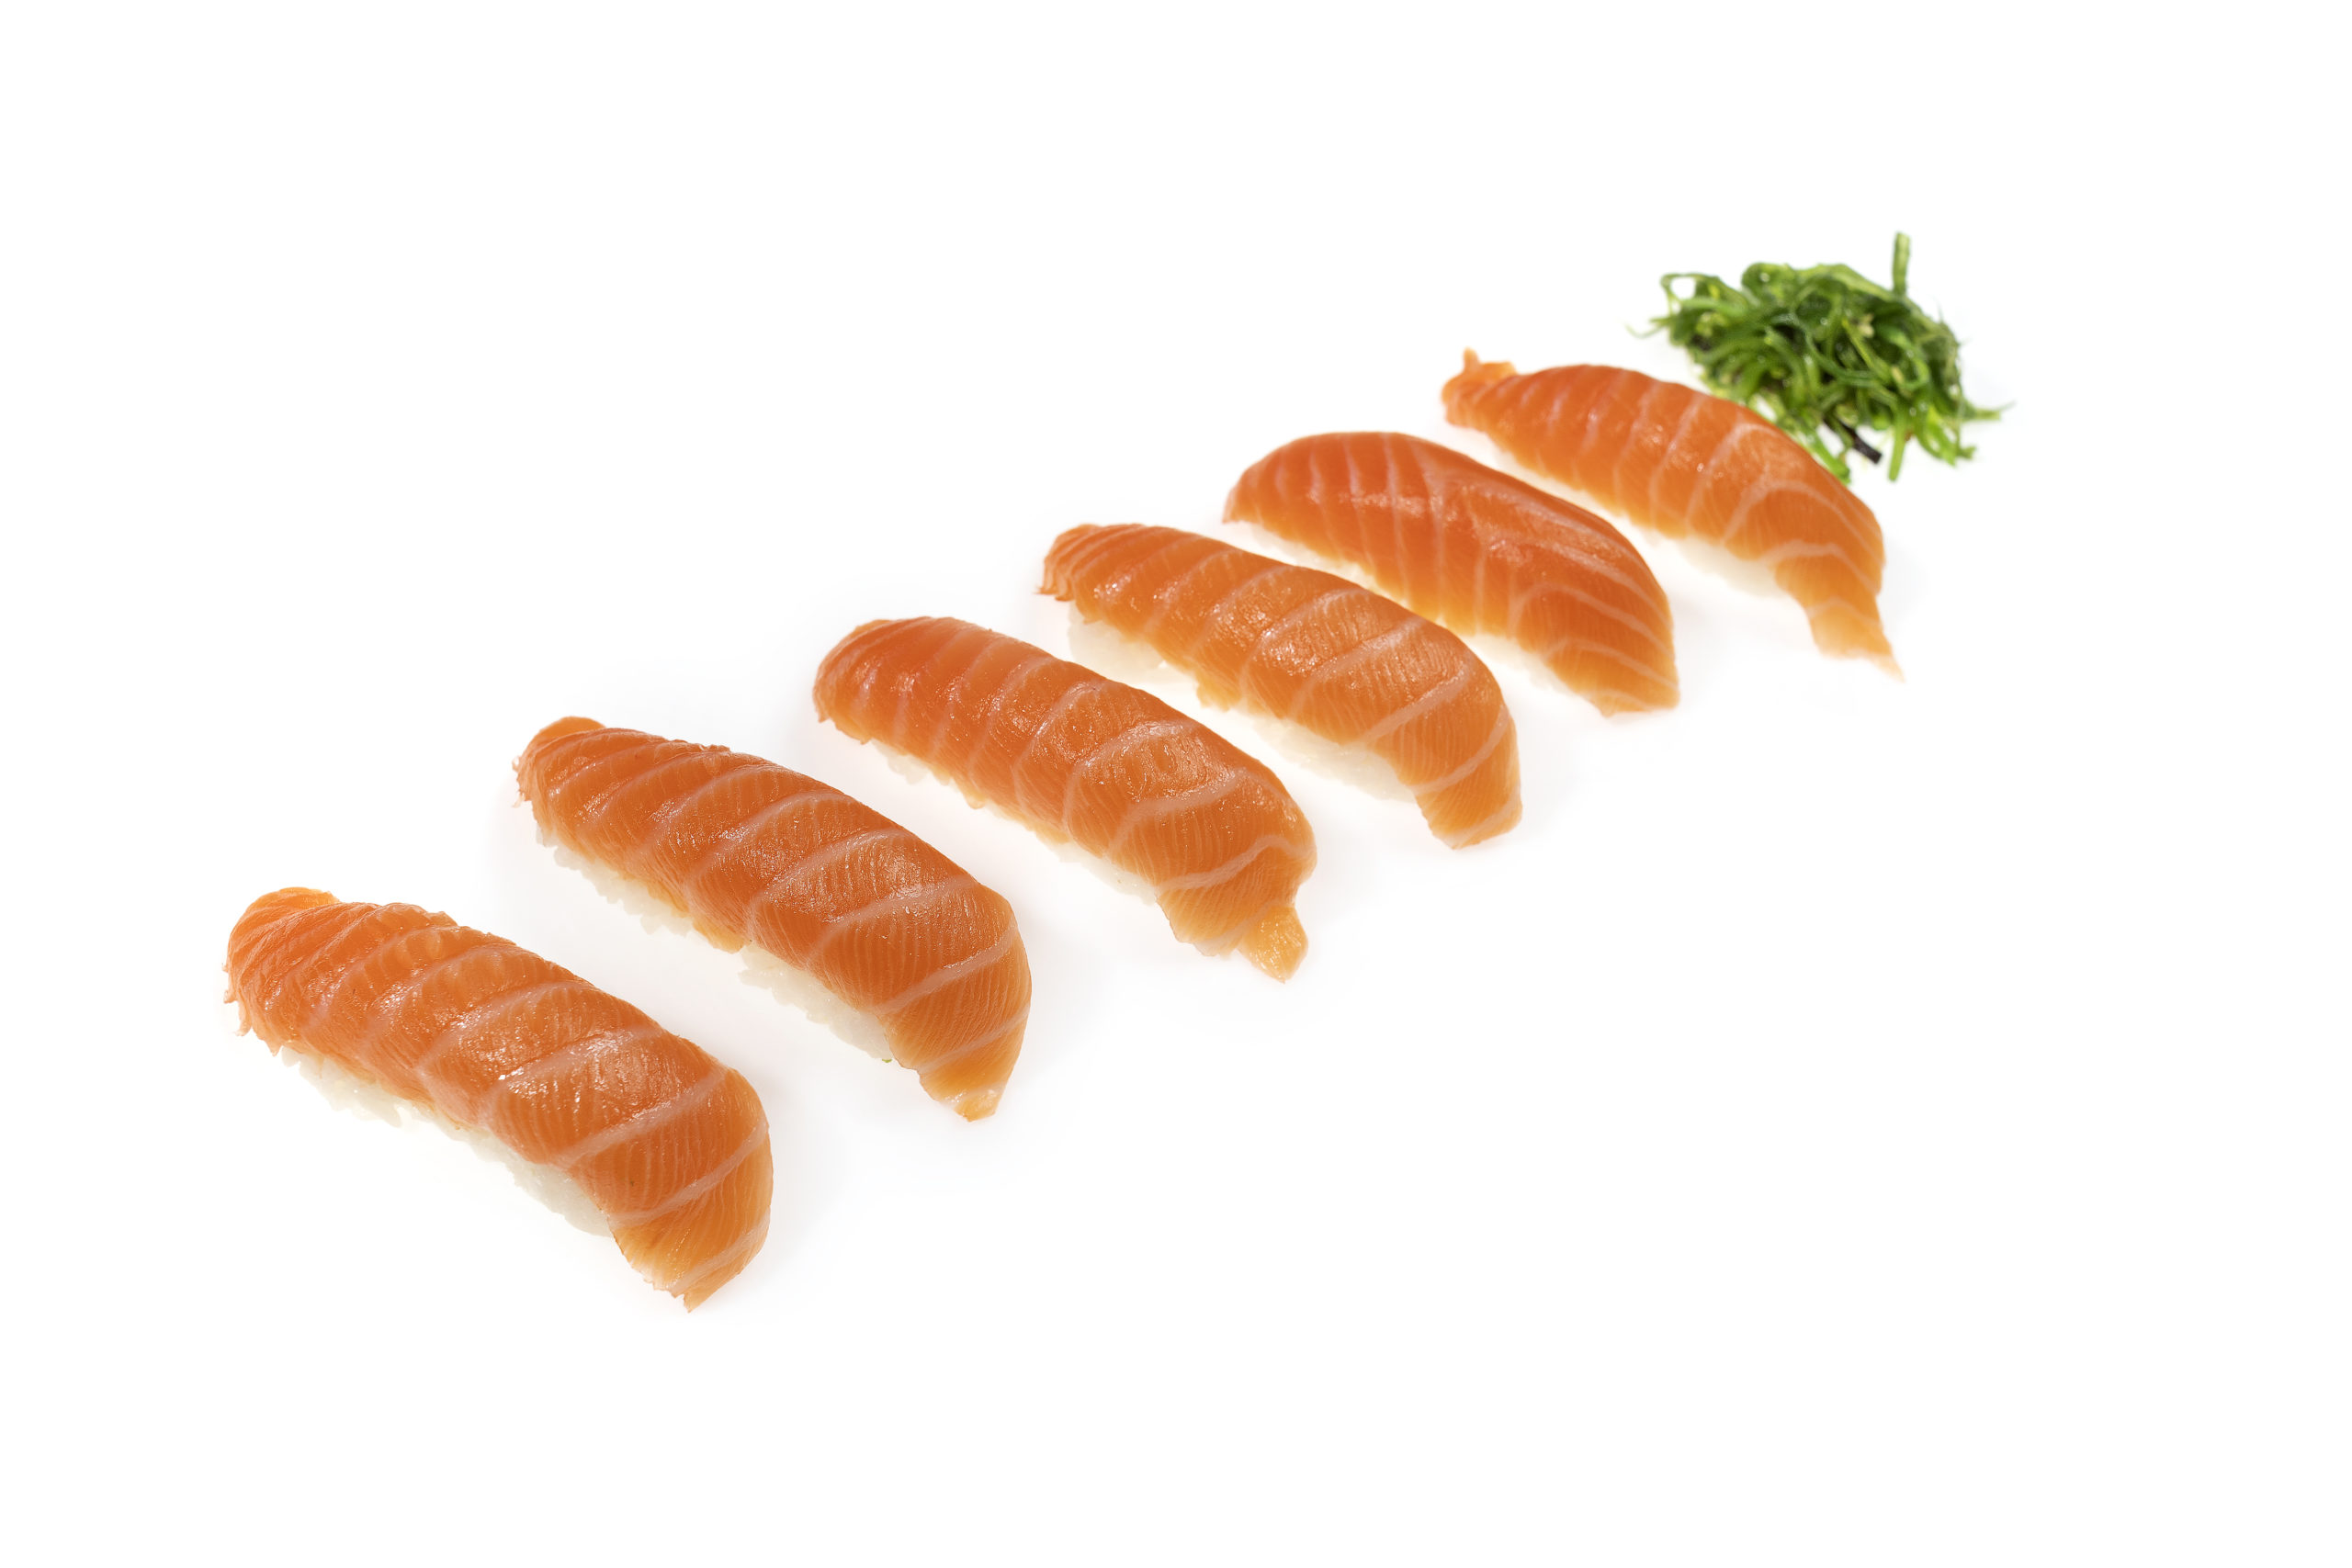 Sashimi pieces and chives